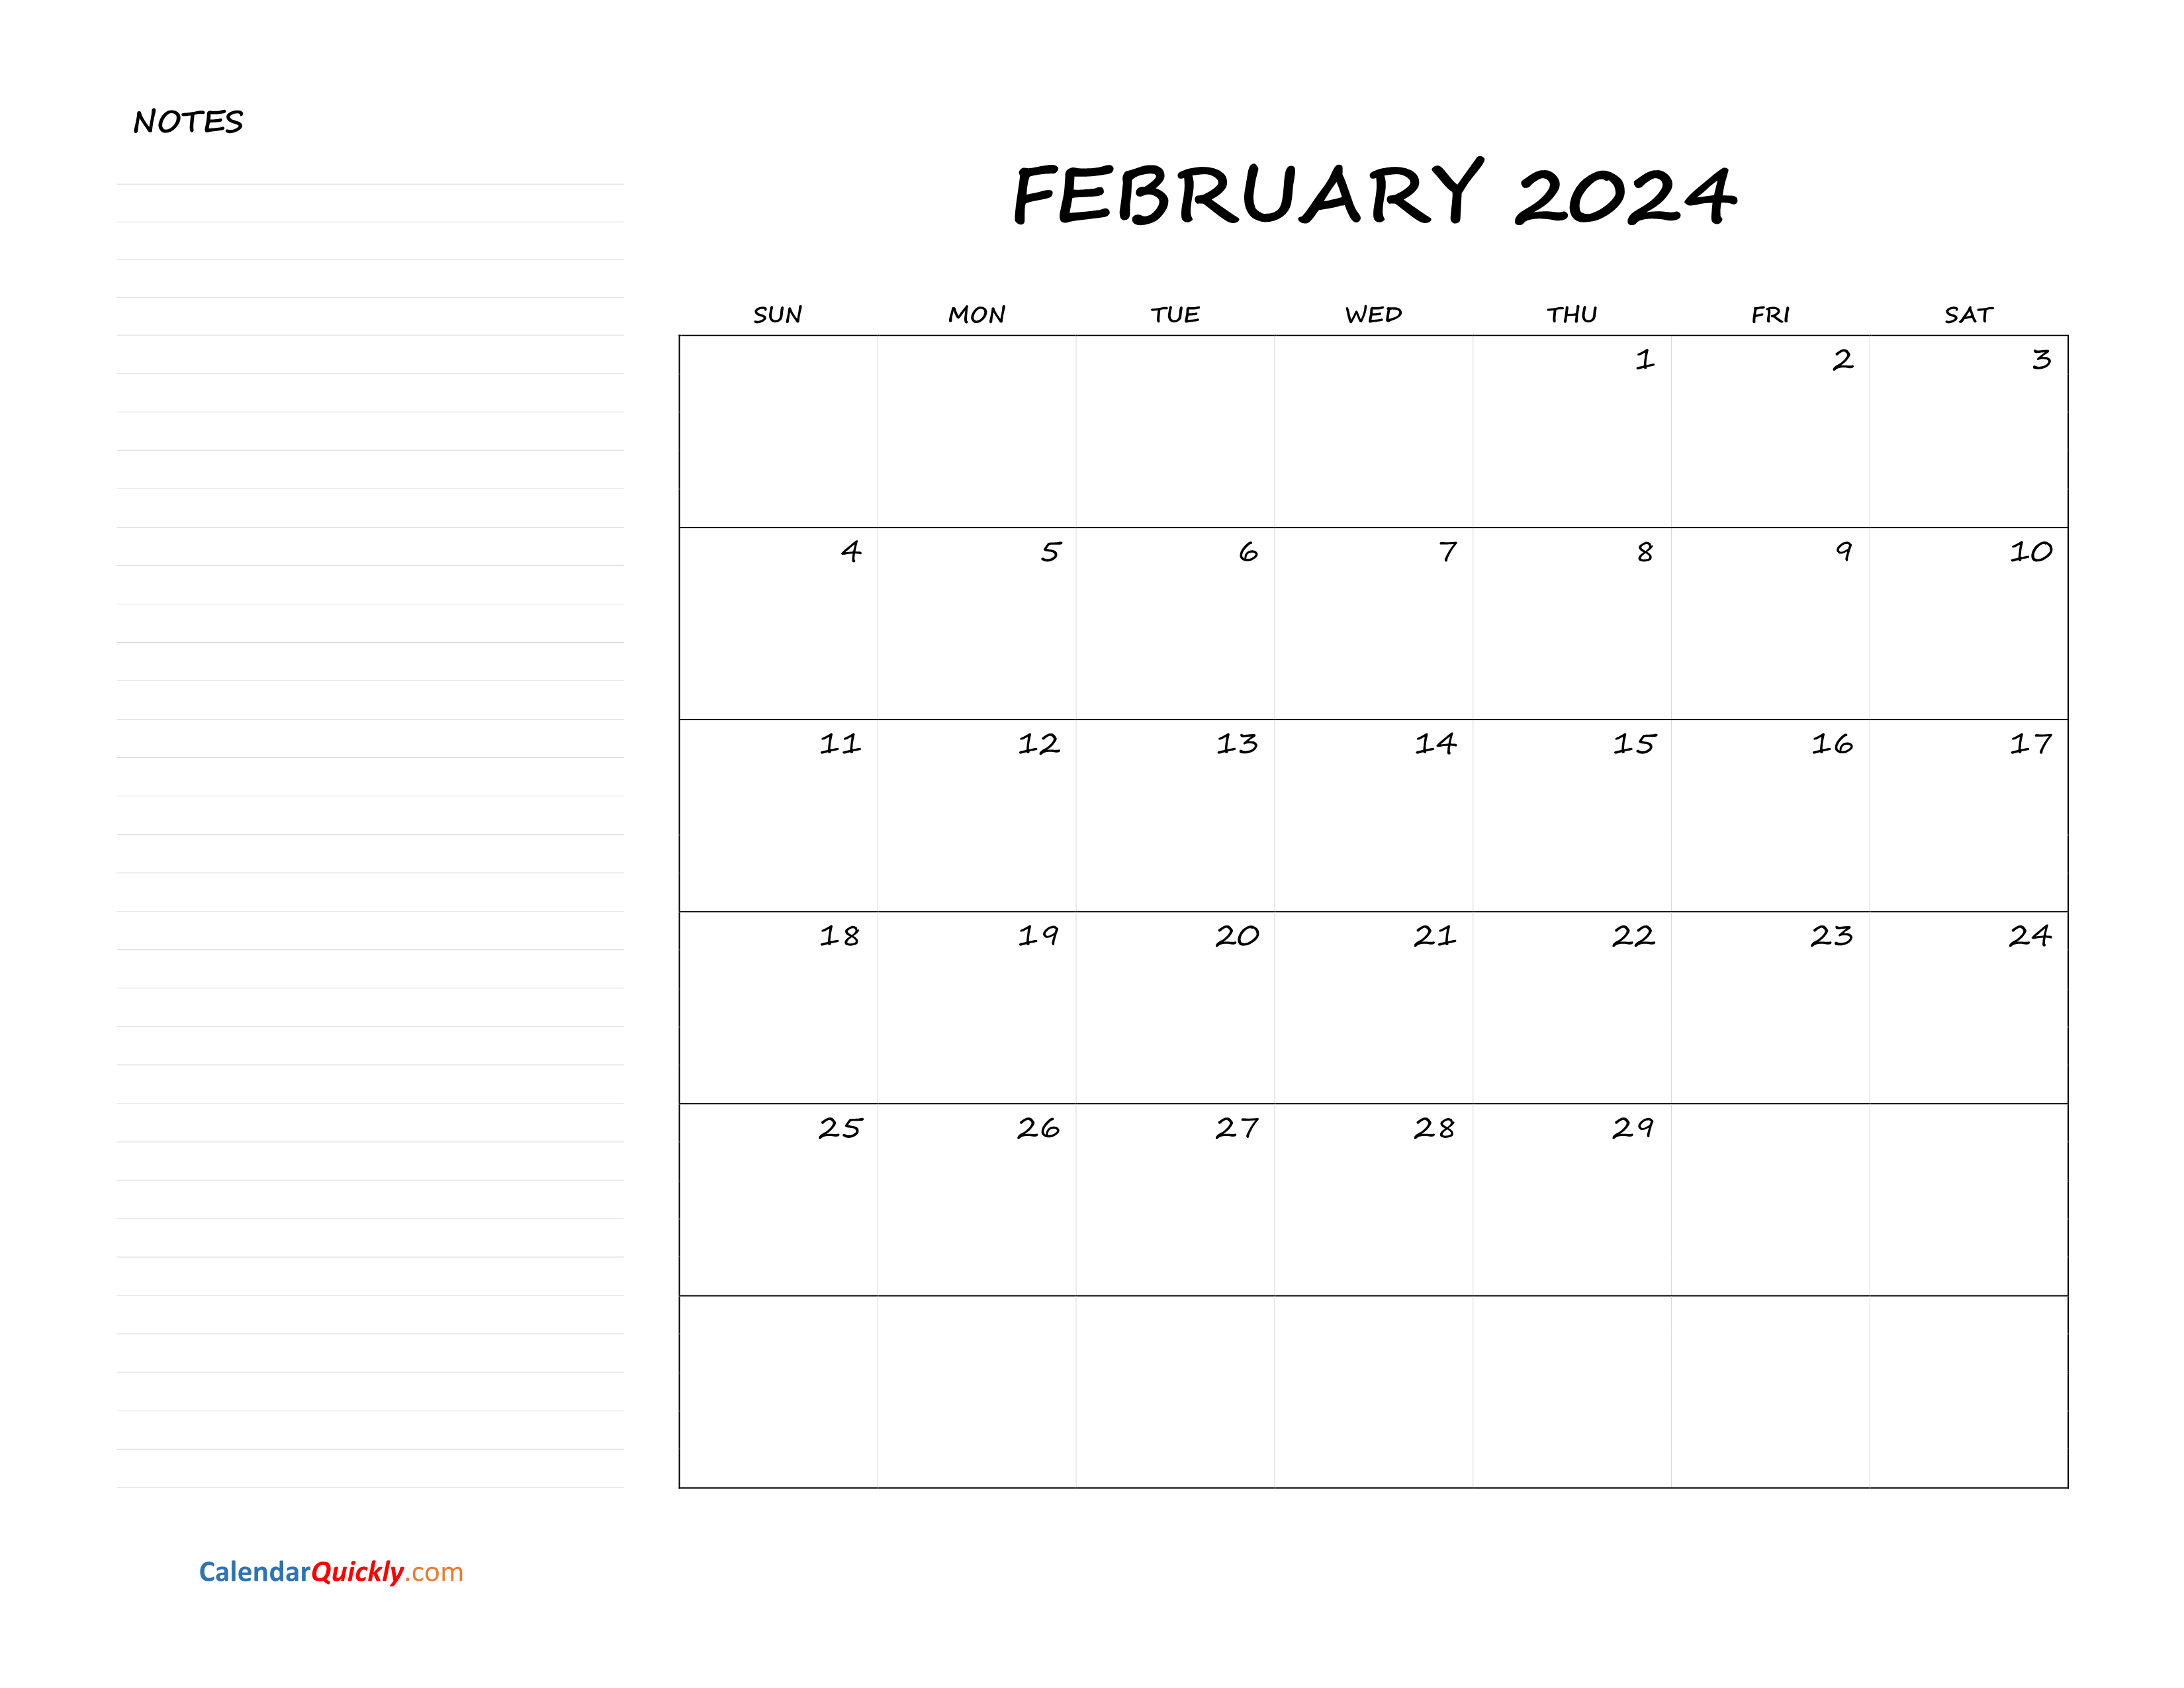 February Blank Calendar 2024 with Notes Calendar Quickly